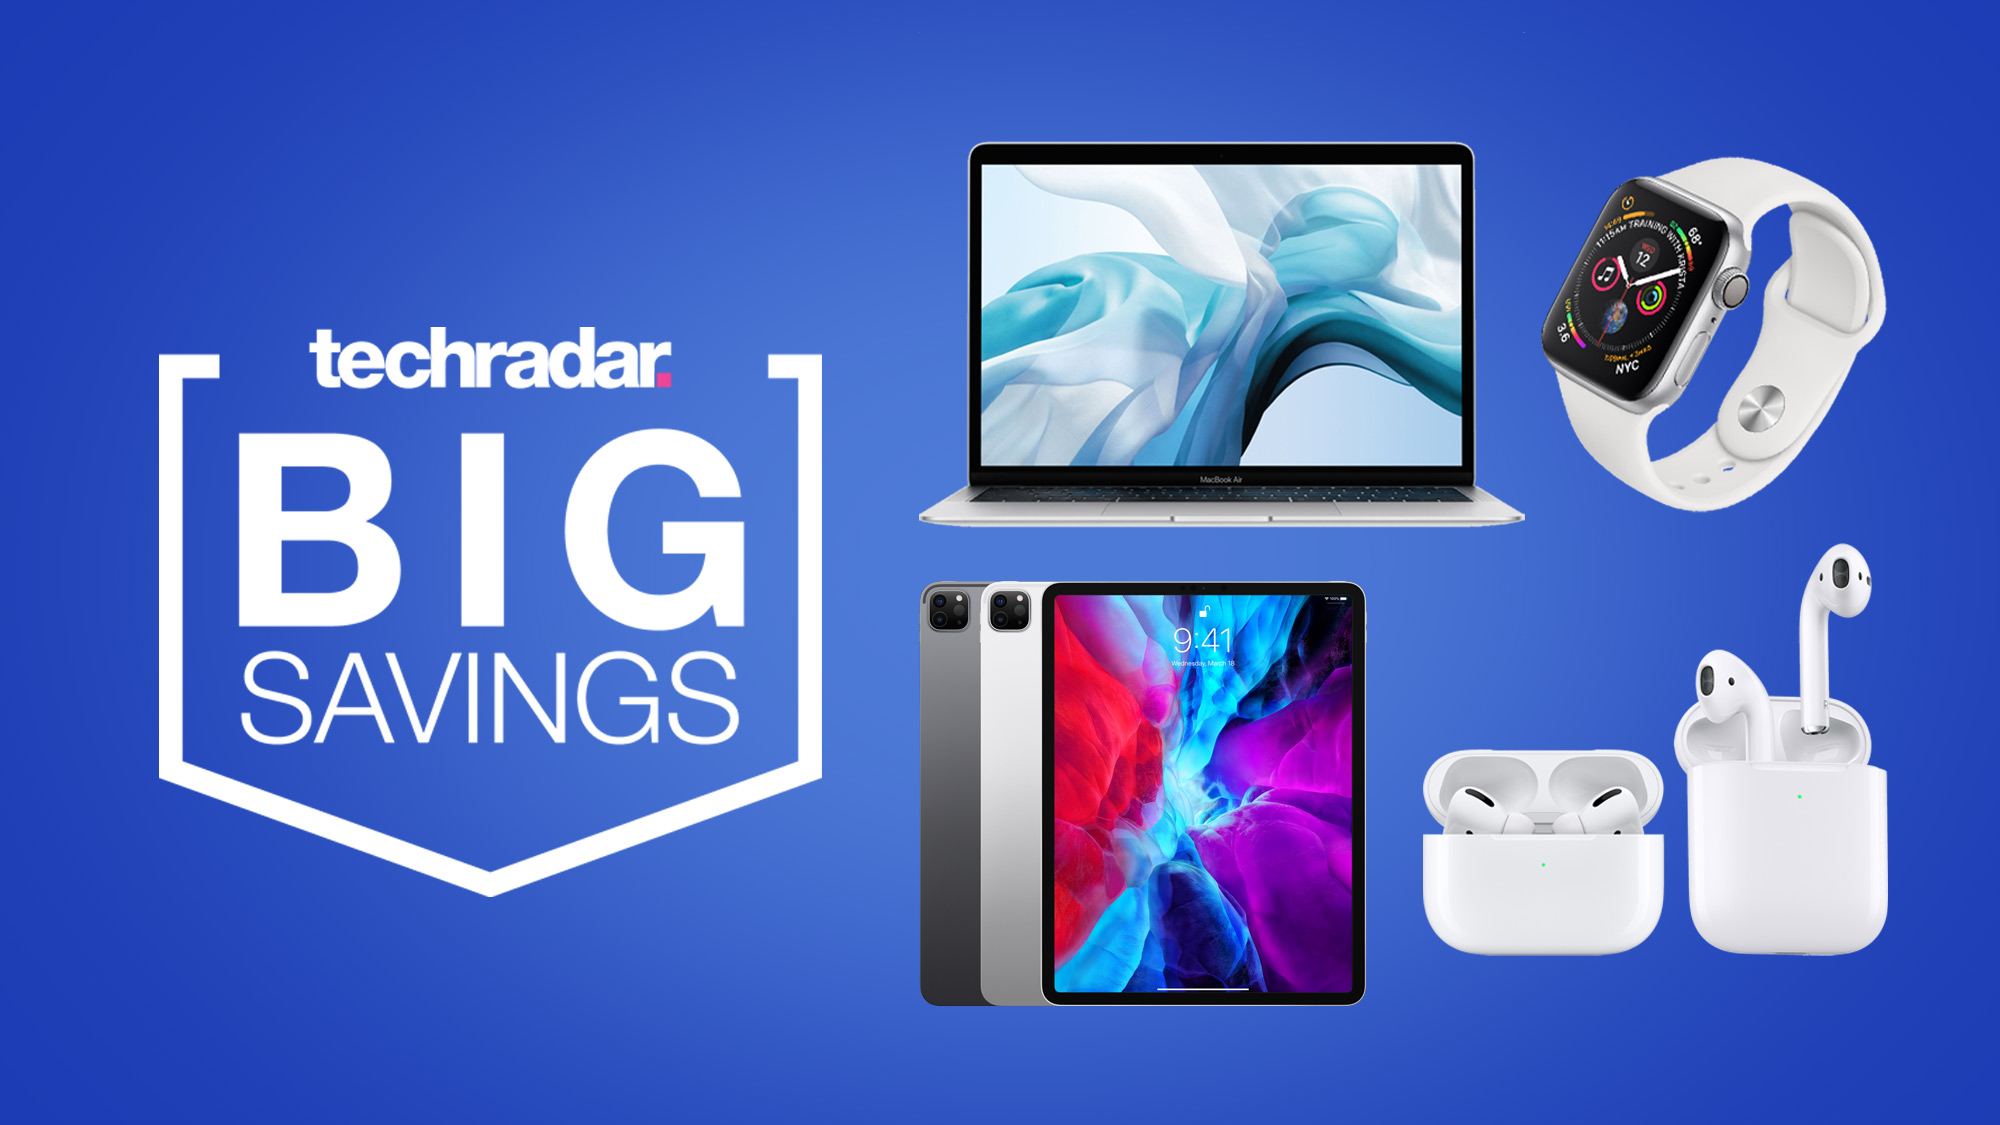 4th of July sales Apple MacBooks, iPads and wearables all discounted